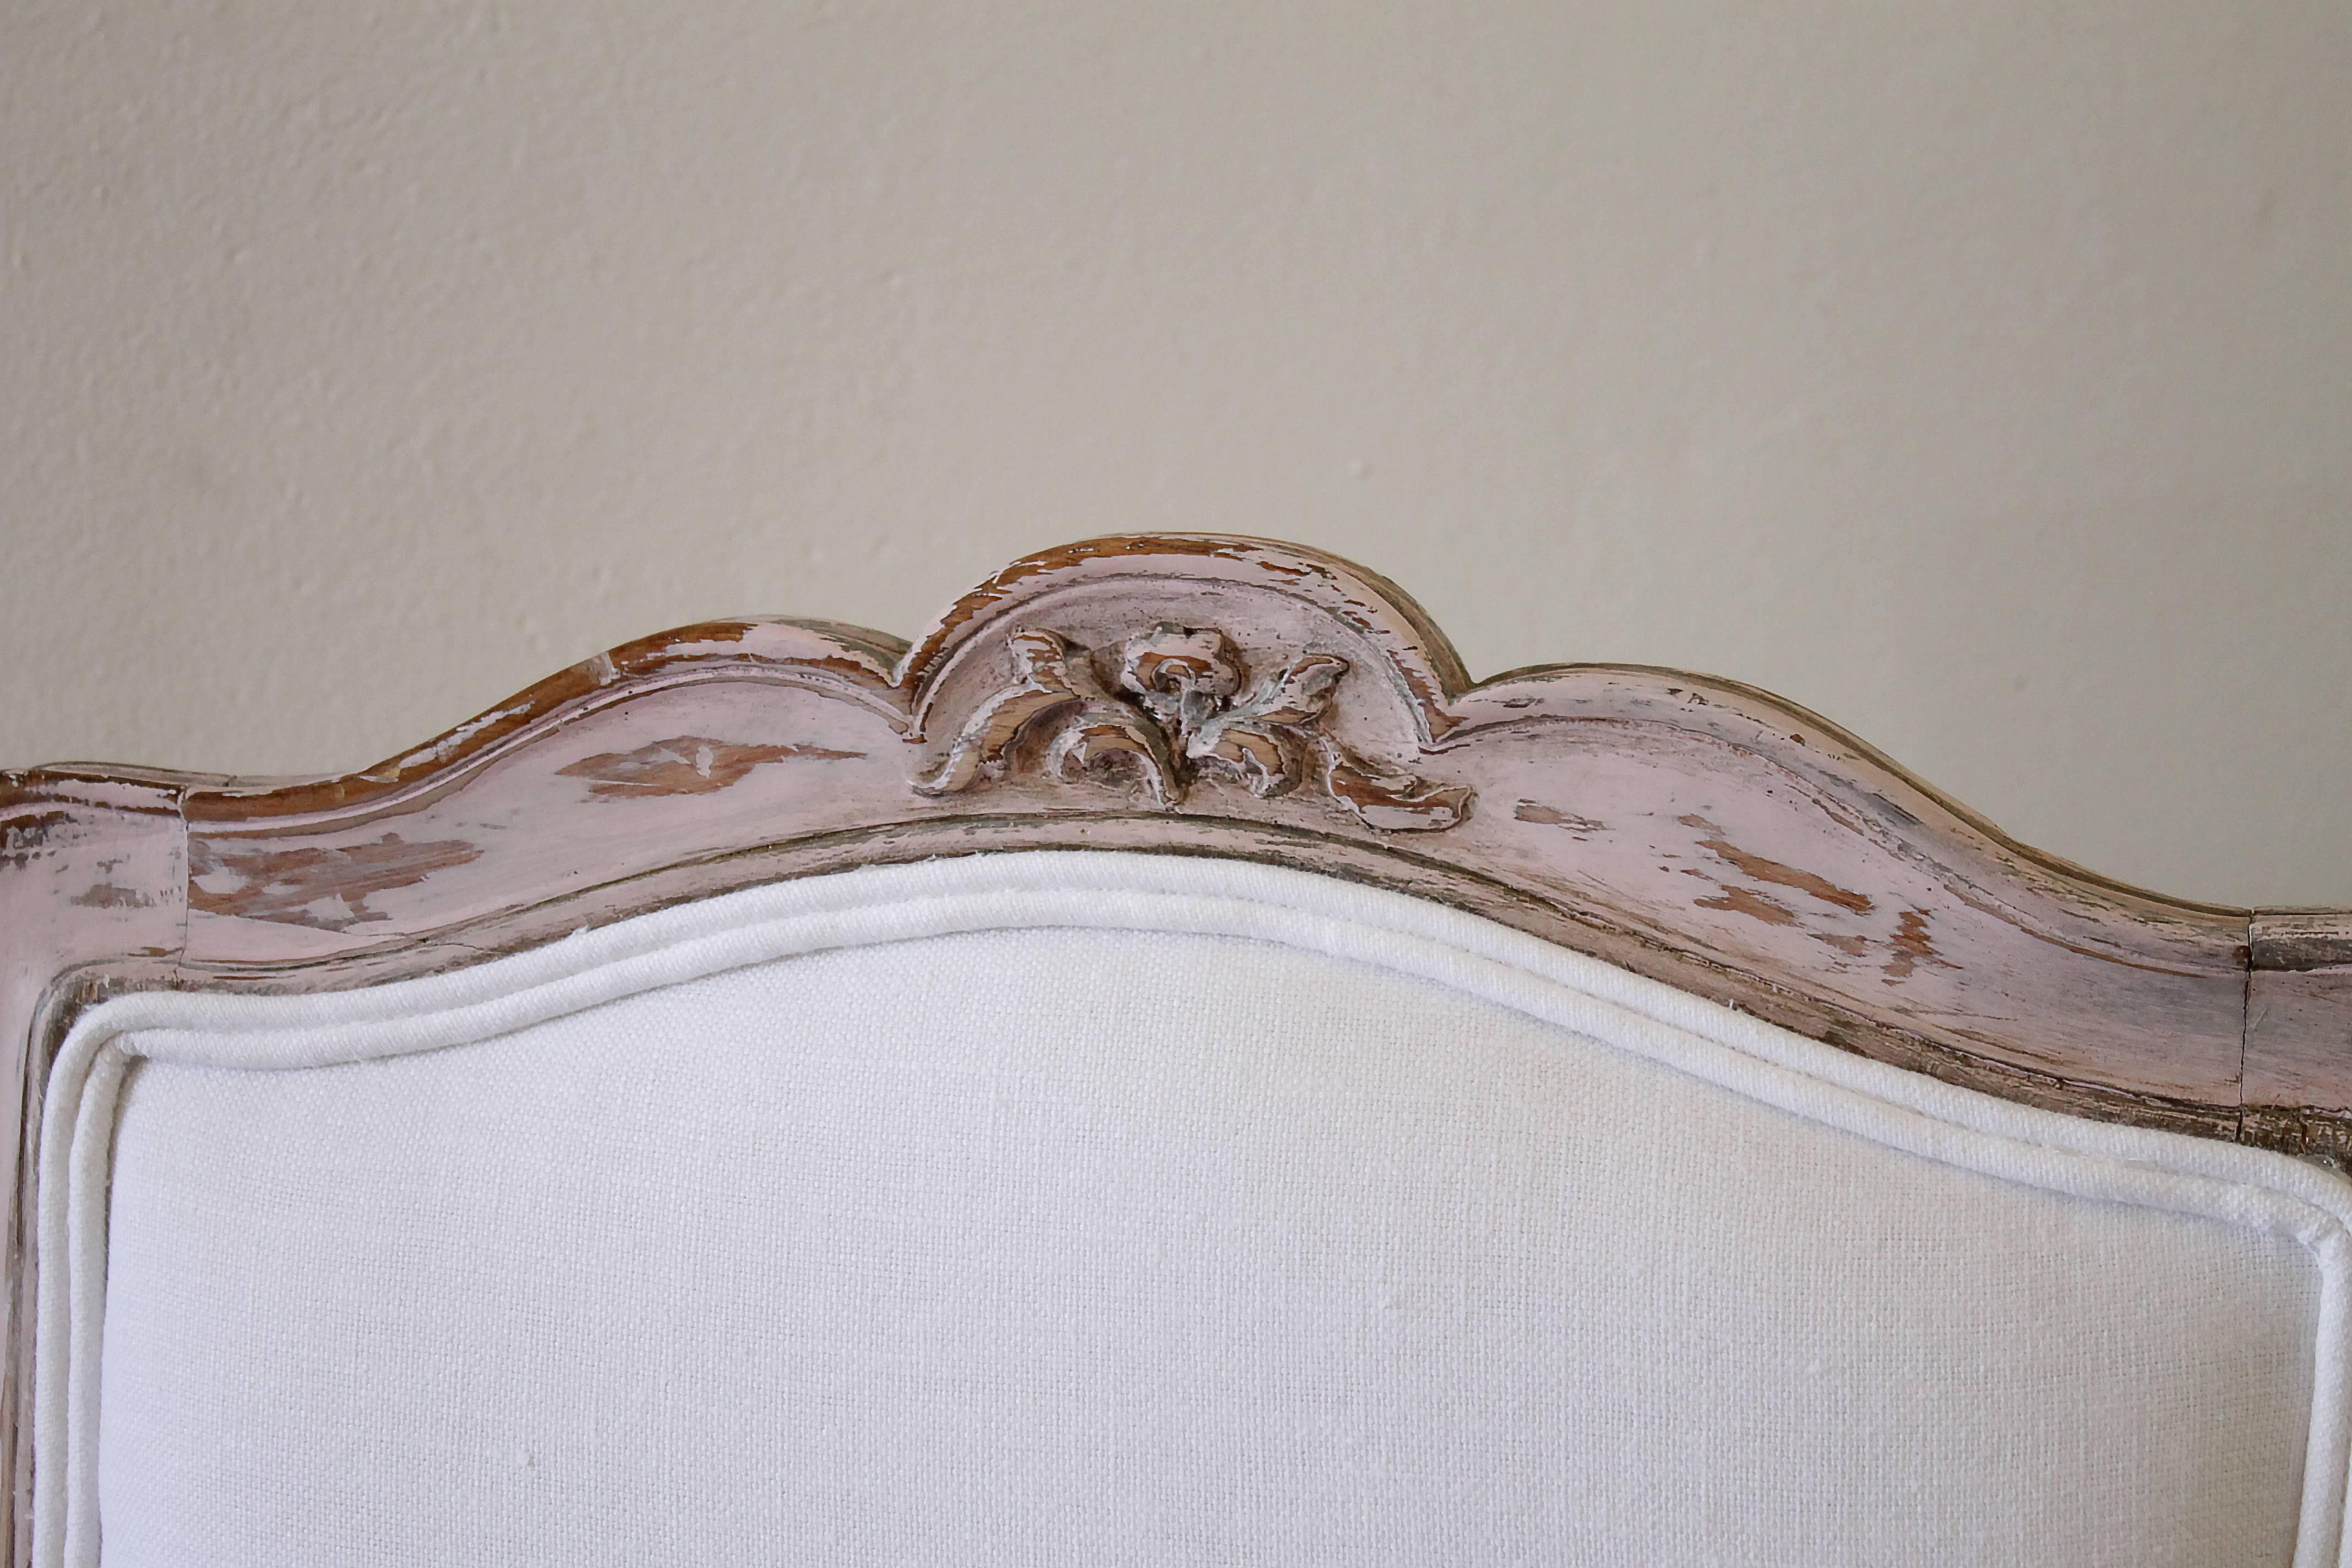 Antique French vanity chair painted in a pale pink and upholstered white Belgian linen.

Measures: 22